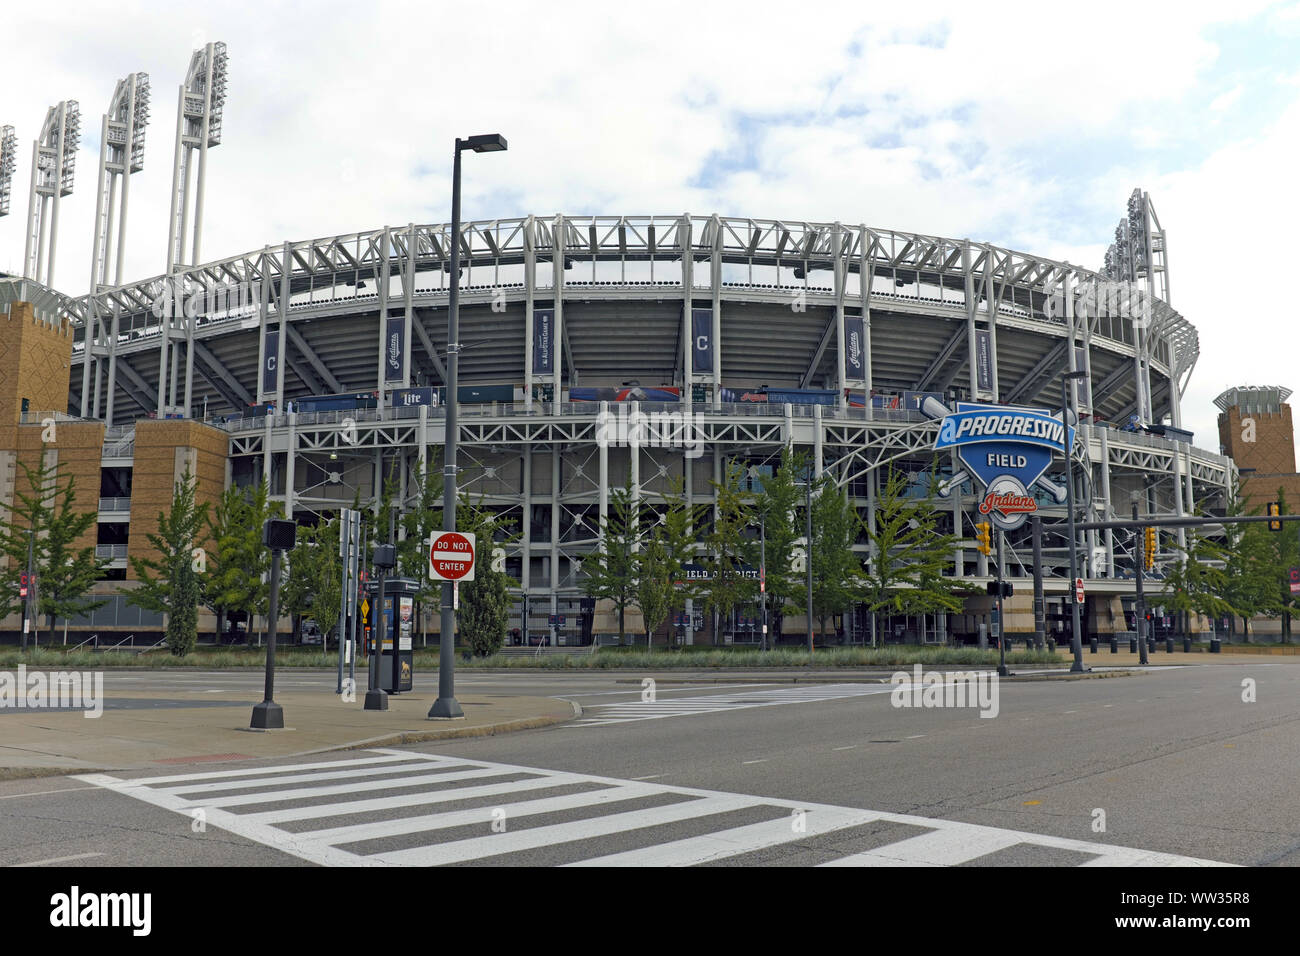 Progresive Field, home of the Major League Cleveland Indians baseball team, stands on the corner of Ontario and Carnegie in Cleveland, Ohio. Stock Photo